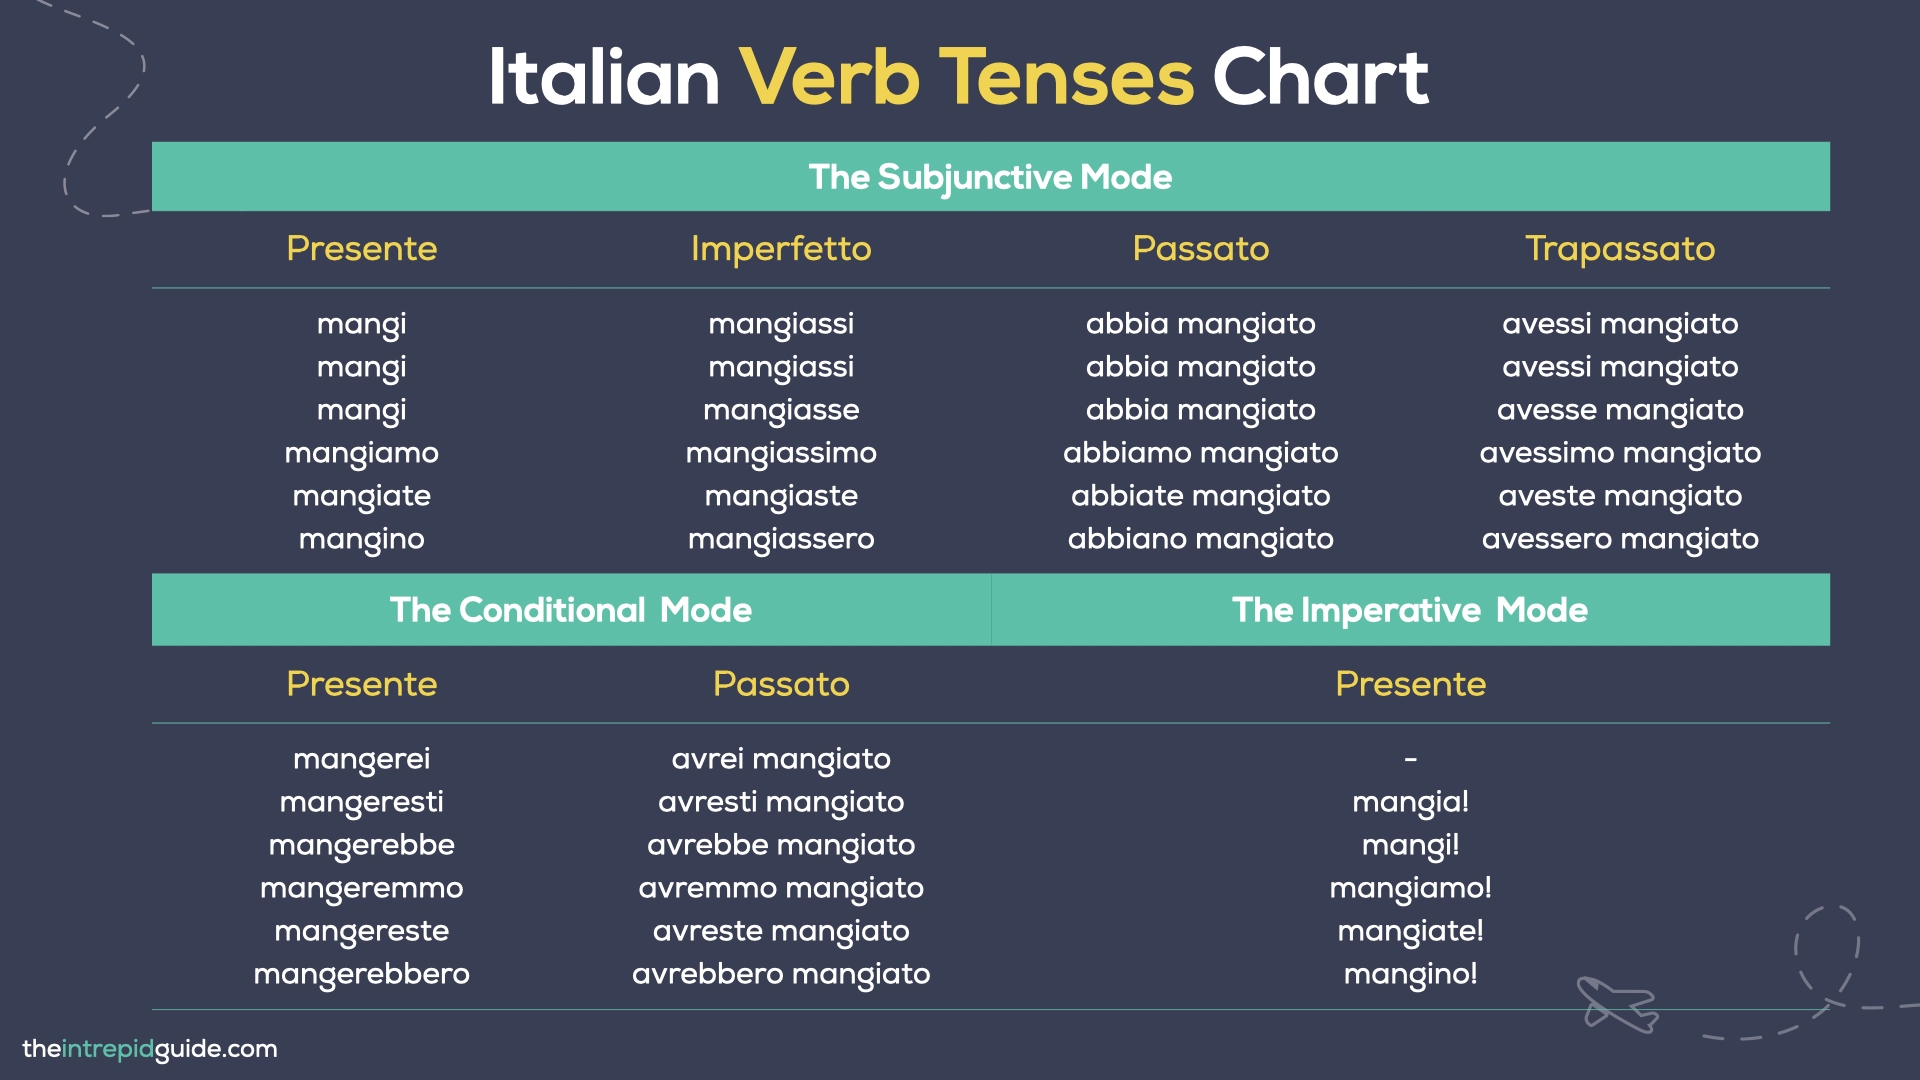 Italian Verb Tenses Chart - Subjunctive, Conditional, Imperative Modes